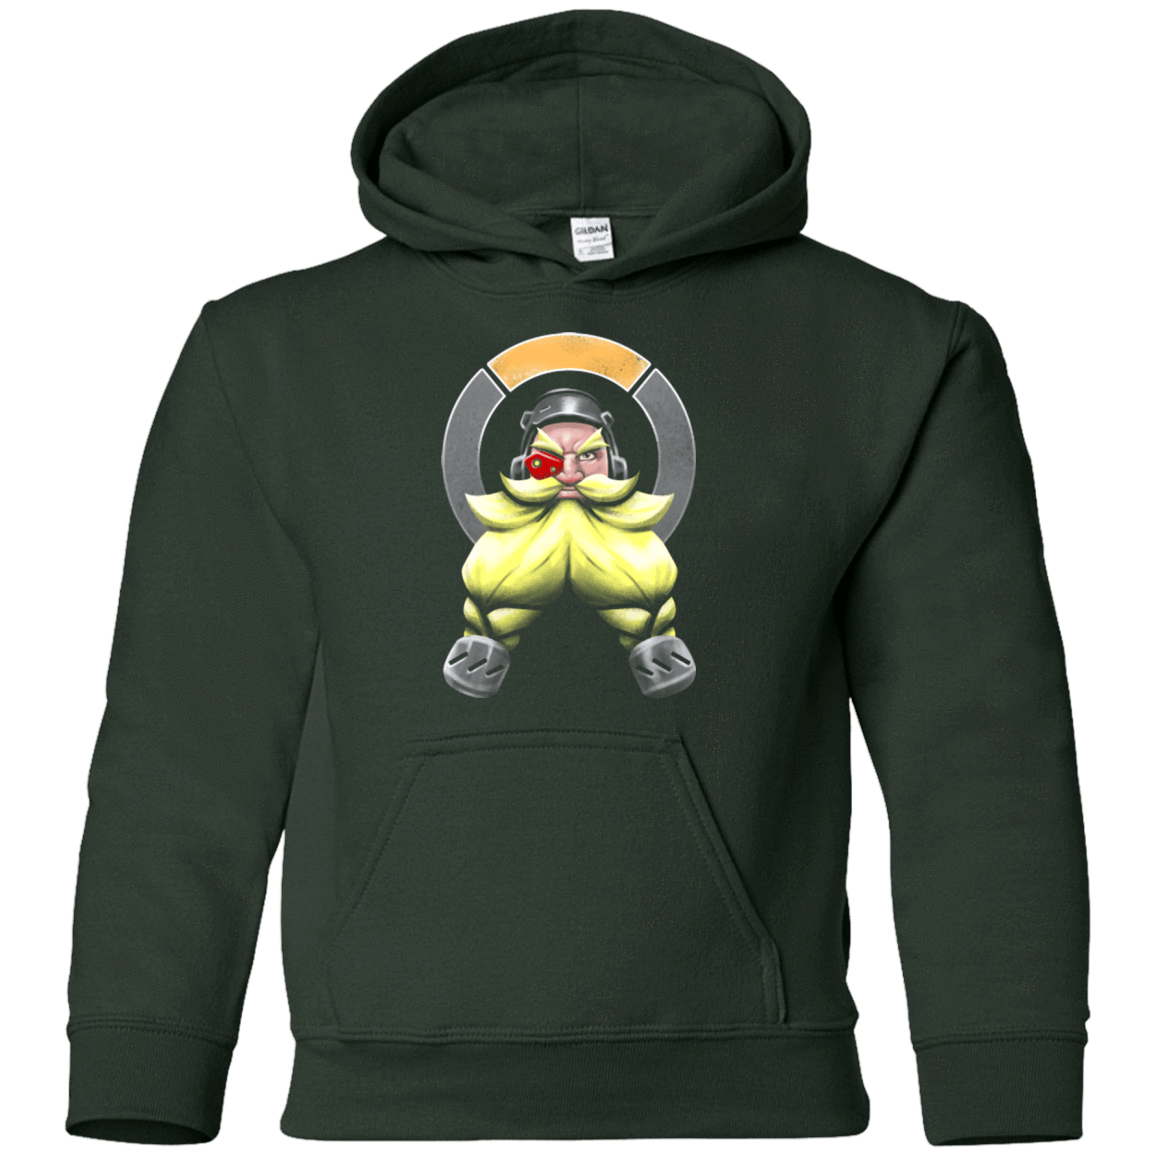 Sweatshirts Forest Green / YS The Engineer Youth Hoodie